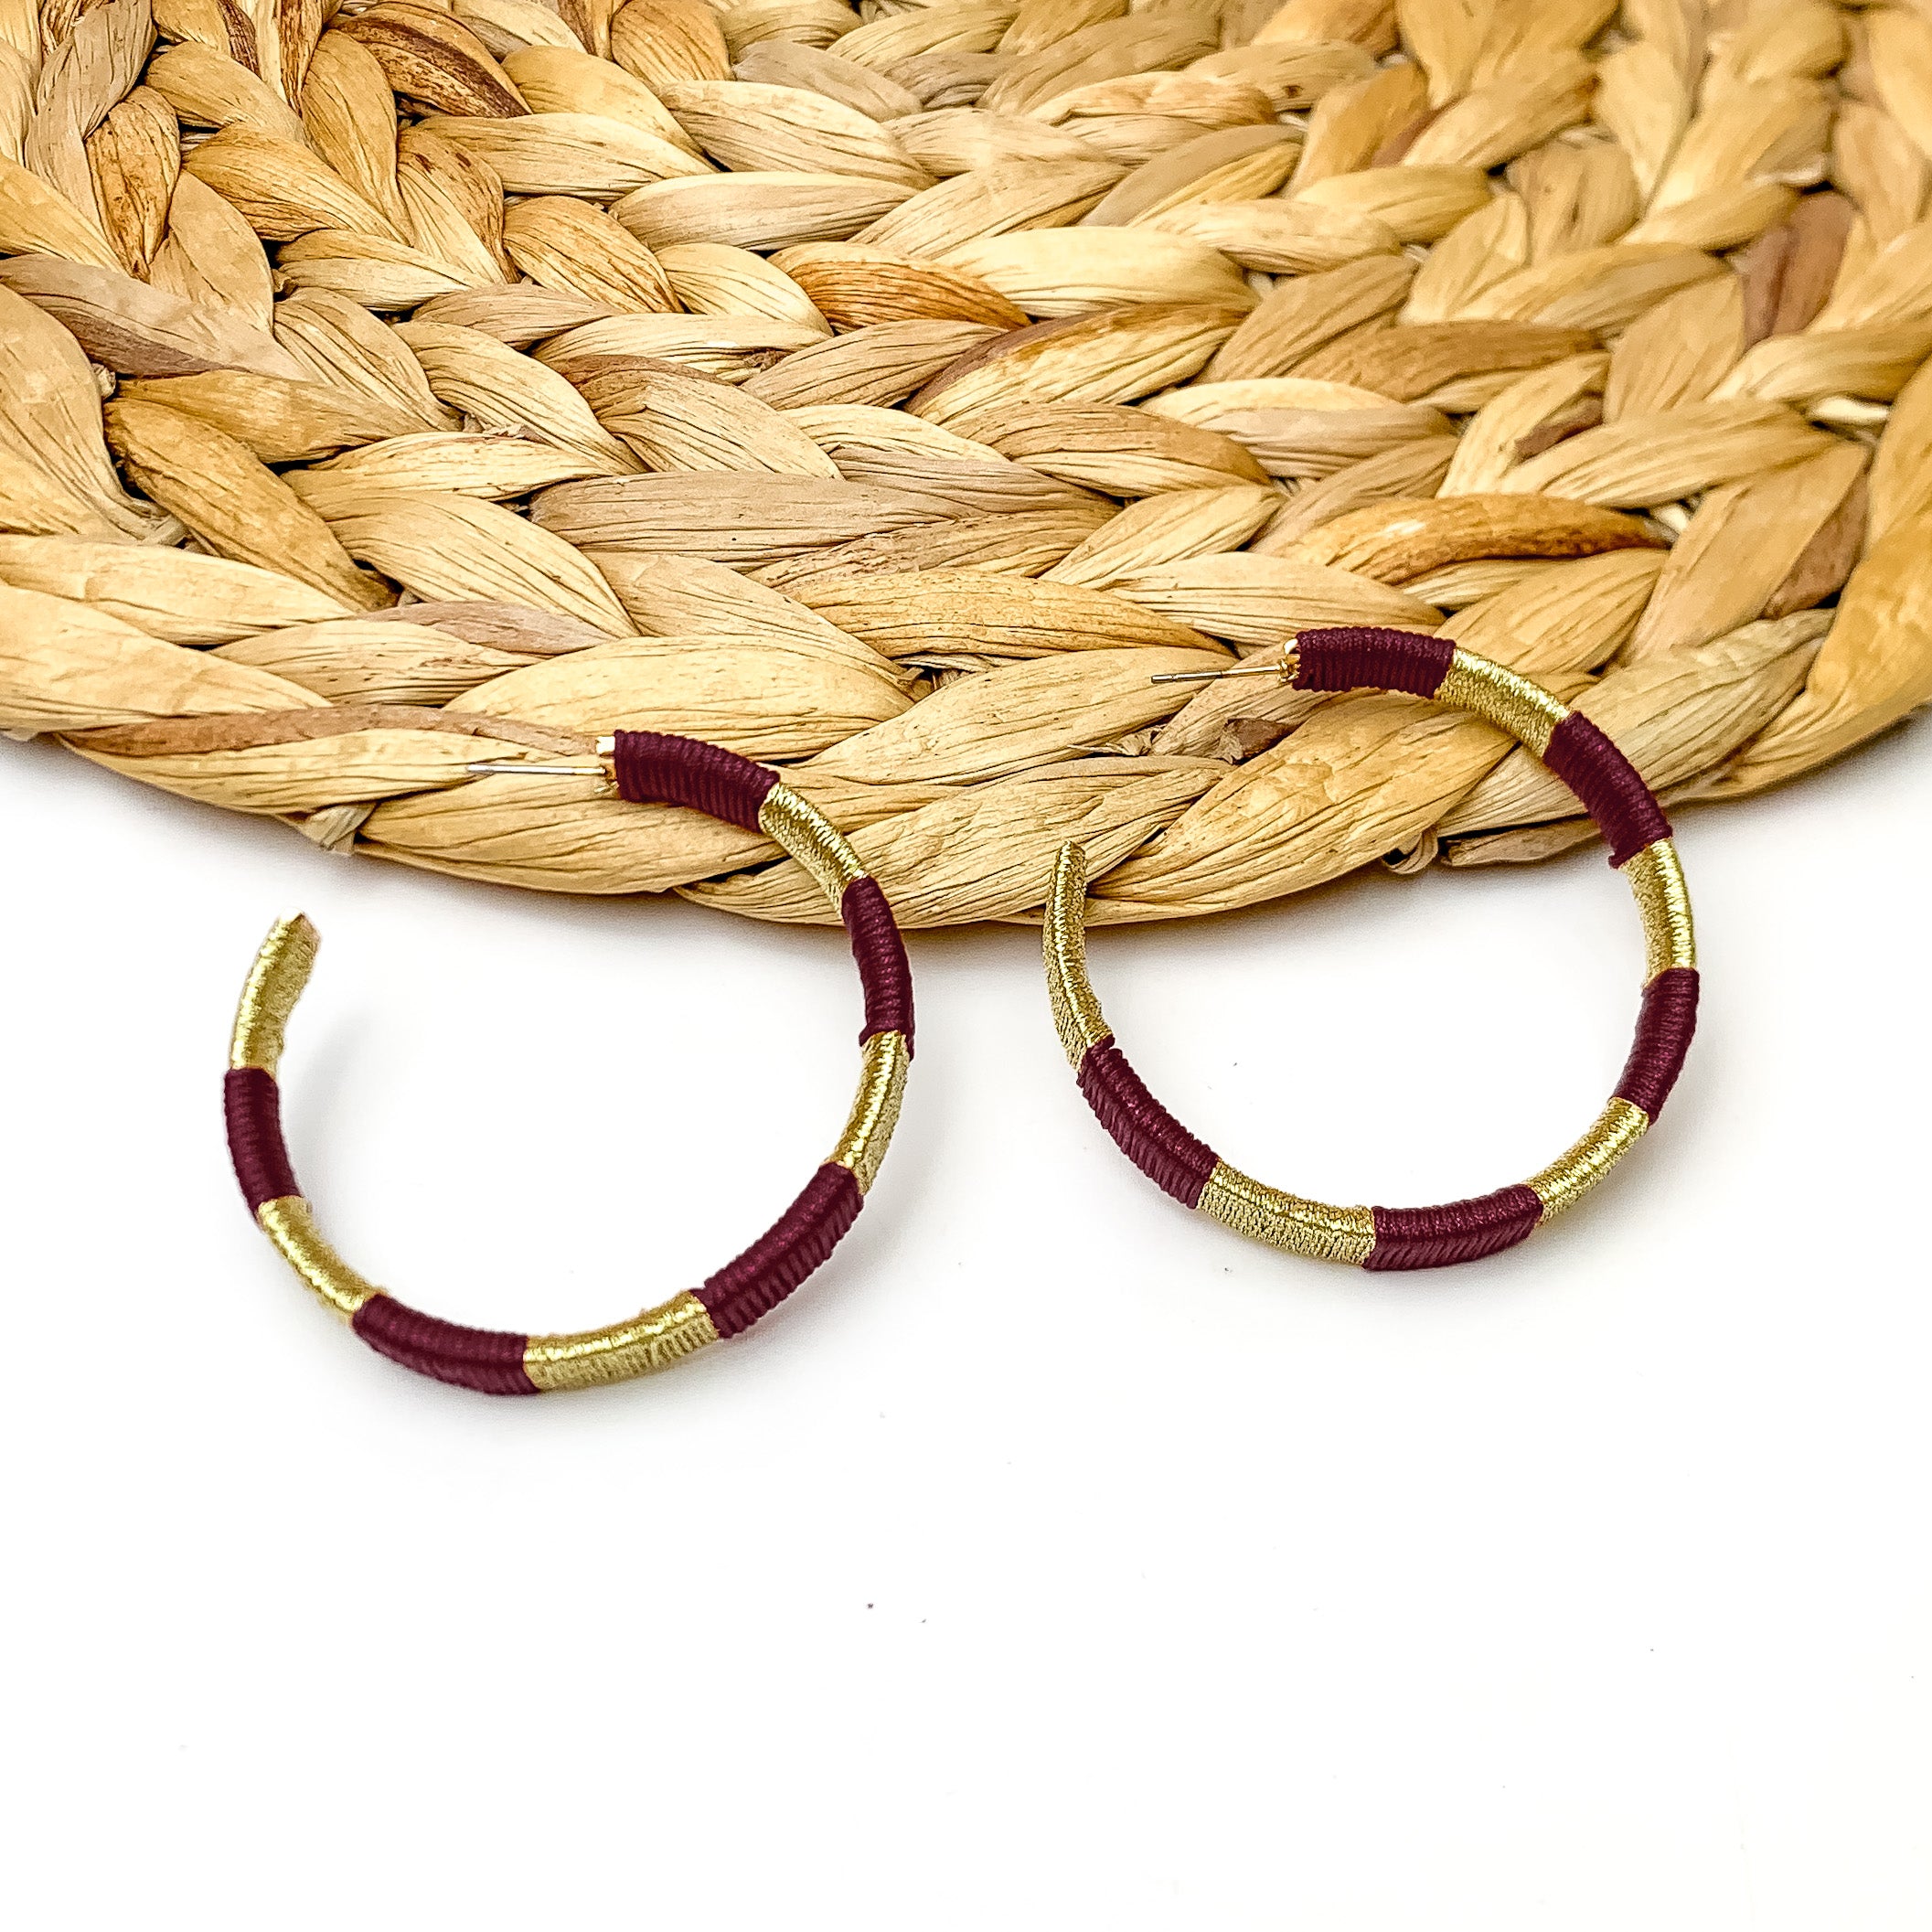 Game Day Glam Colored Hoop Earrings in Maroon and Gold. The two colored hoops are laying against a woven decoration with a white background.